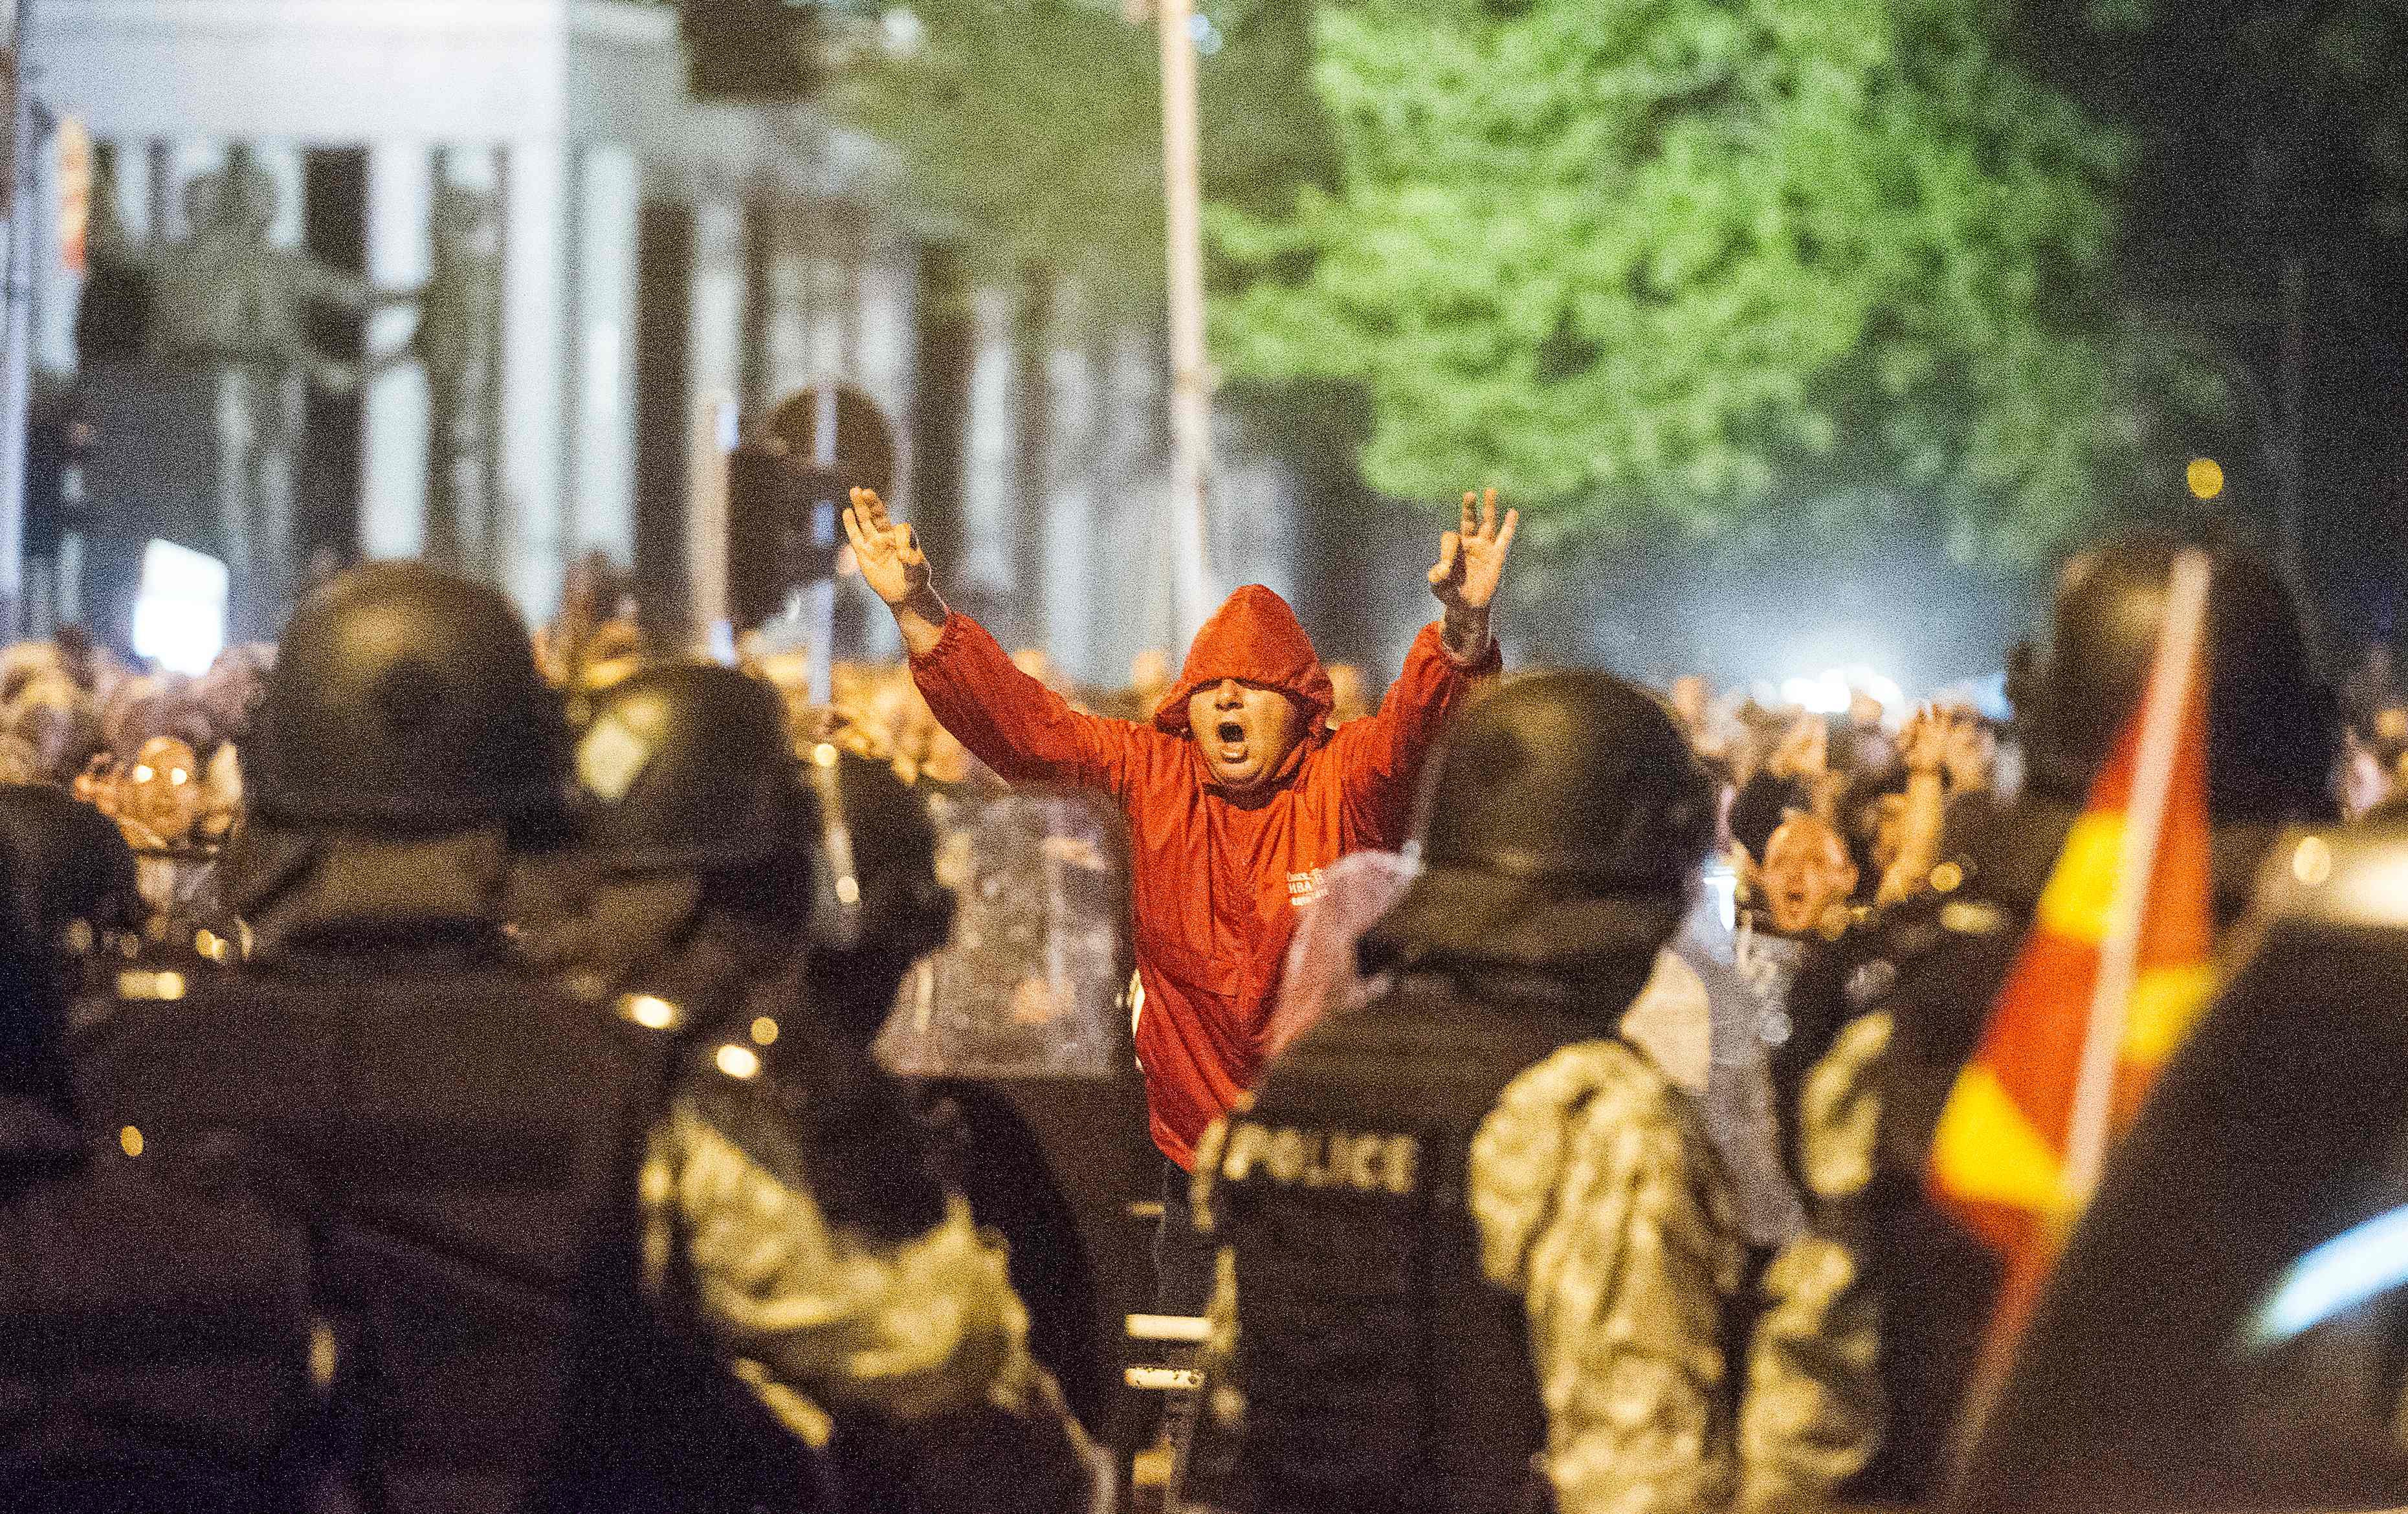 Police face protesters gathered outside Macedonia's parliament after the governing Social Democrats and ethnic Albanian parties voted to elect an Albanian as parliament speaker in Skopje on April 27, 2017. Macedonia's opposition leader was among at least 10 people injured in parliament on April 27 after protesters stormed the building following an allegedly unfair vote for a parliamentary speaker, witnesses and local media reported. The violence erupted after around 100 protesters supporting the rival VMRO-DPMNE party entered parliament waving Macedonian flags and singing the national anthem. / AFP PHOTO / Robert ATANASOVSKI / TT / kod 444